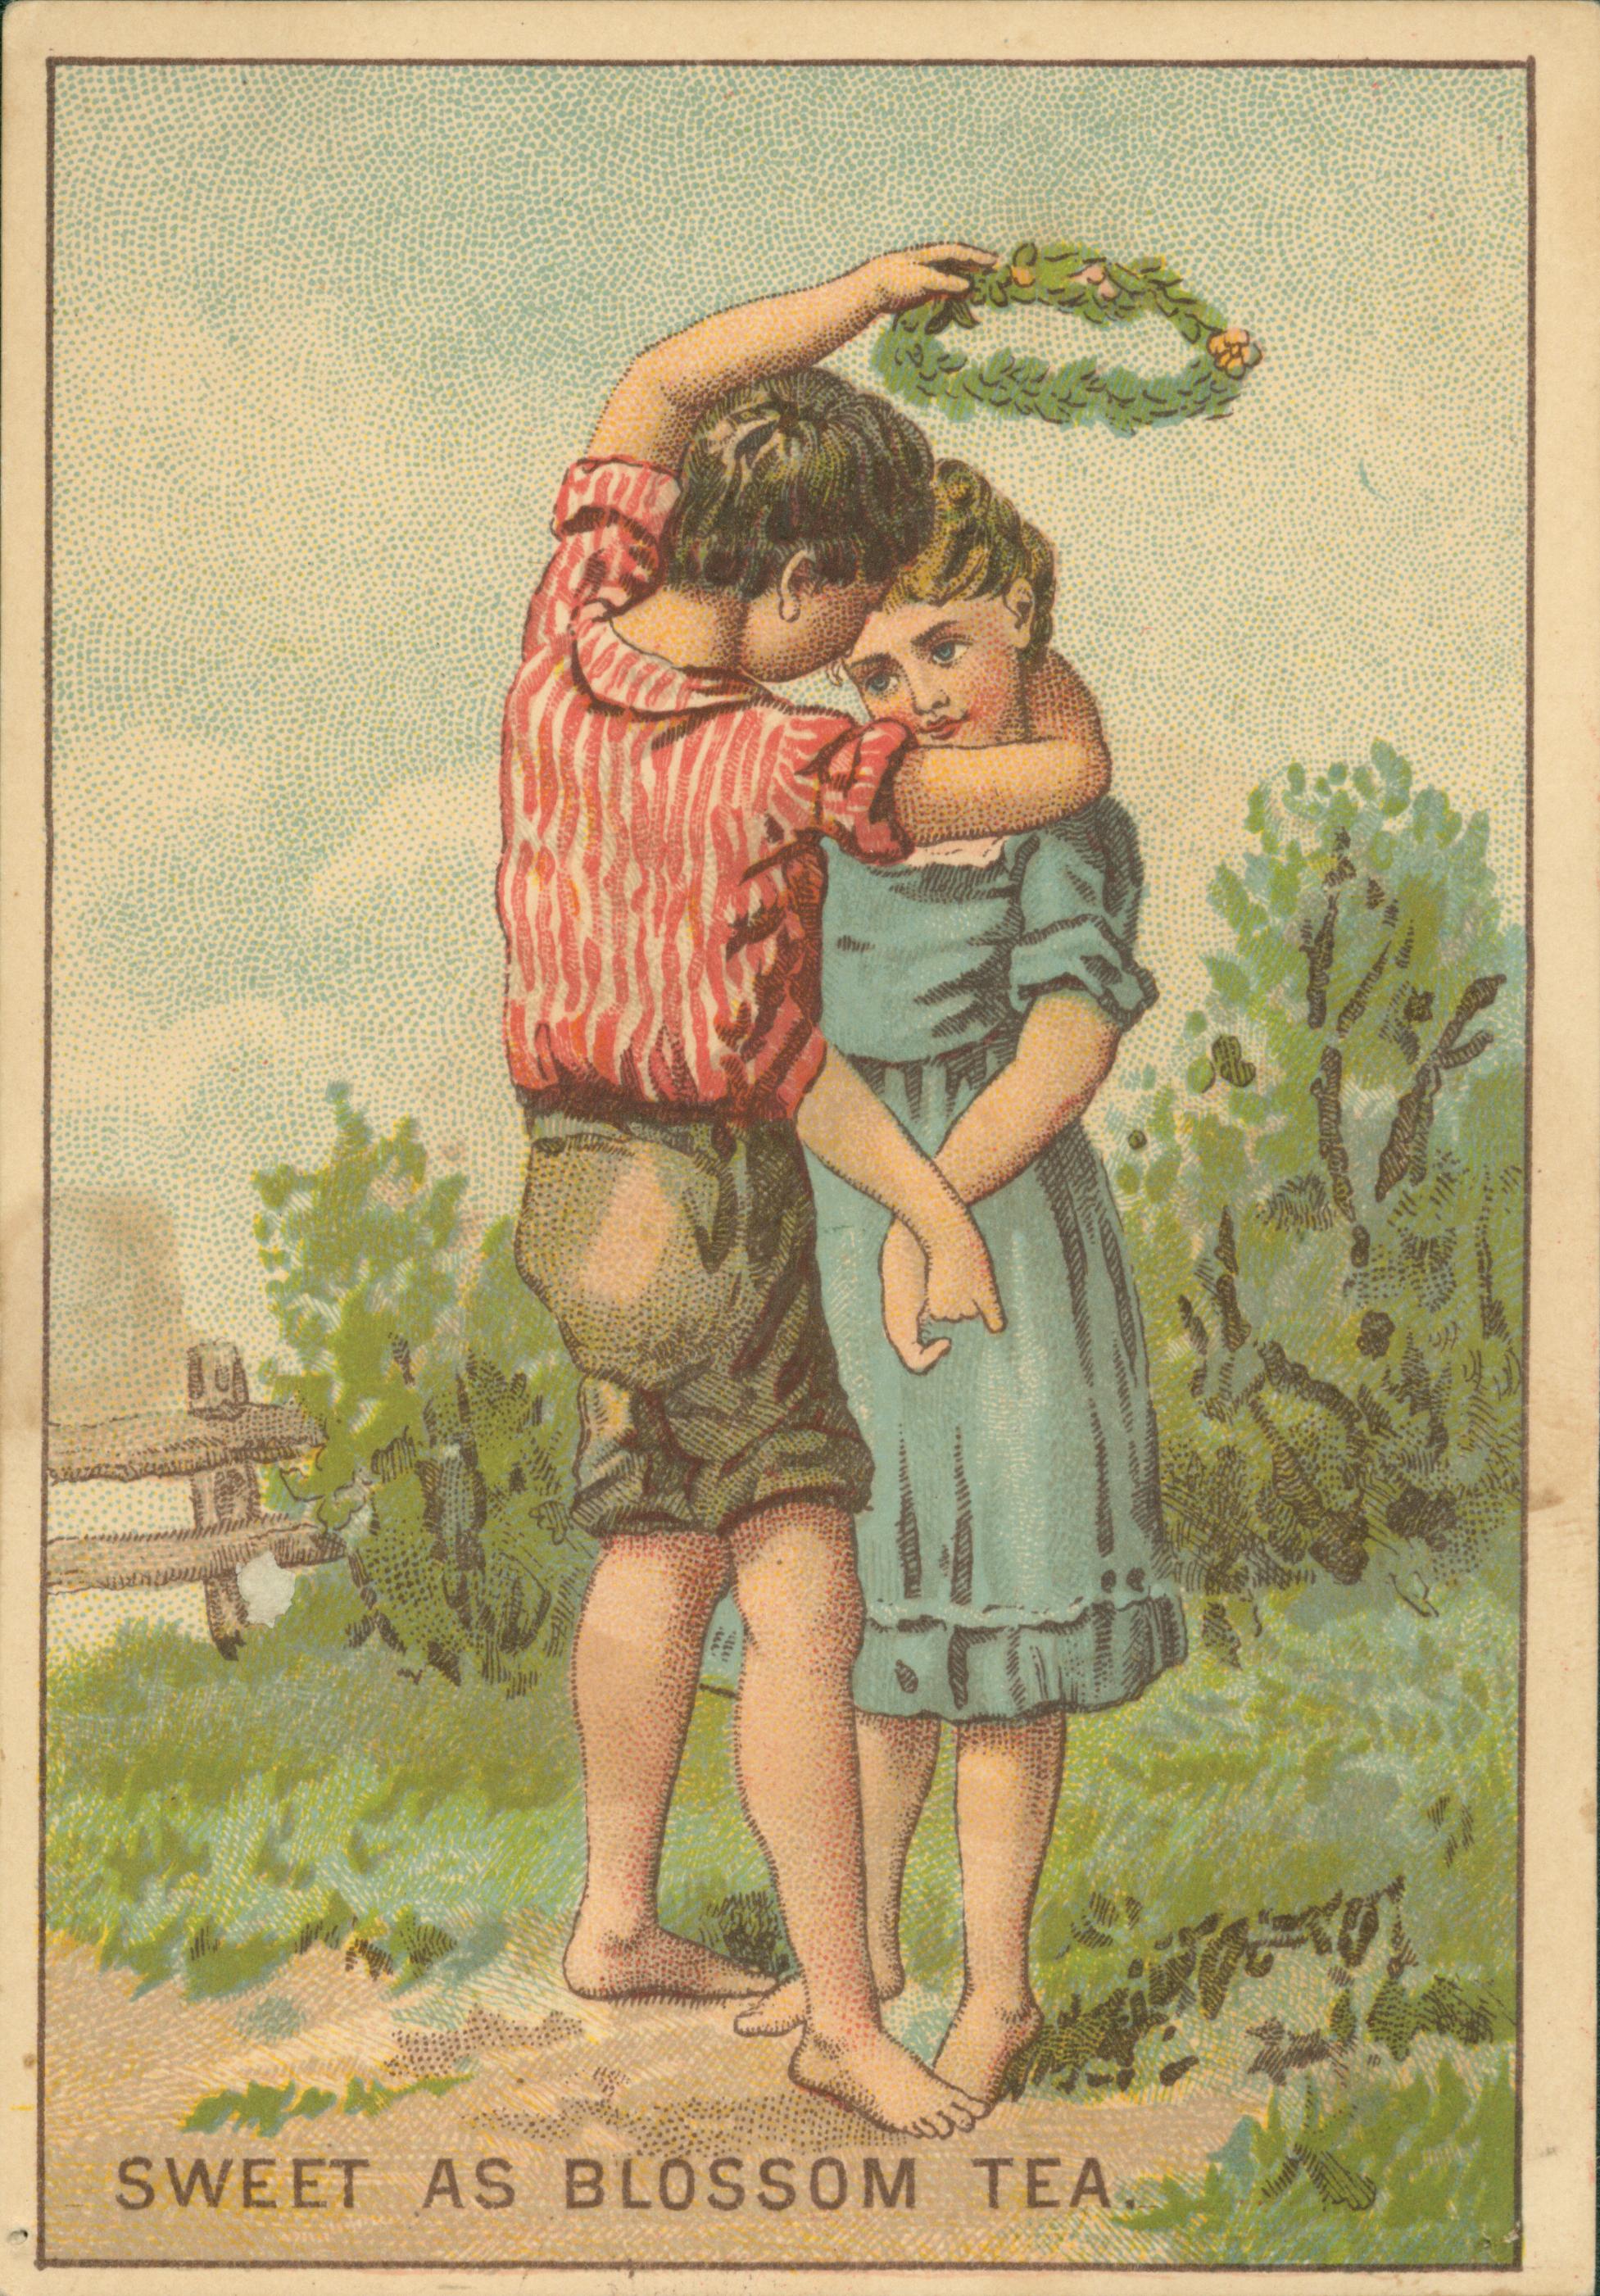 This trade card shows a boy embracing a girl while preparing to crown her with a wreath.